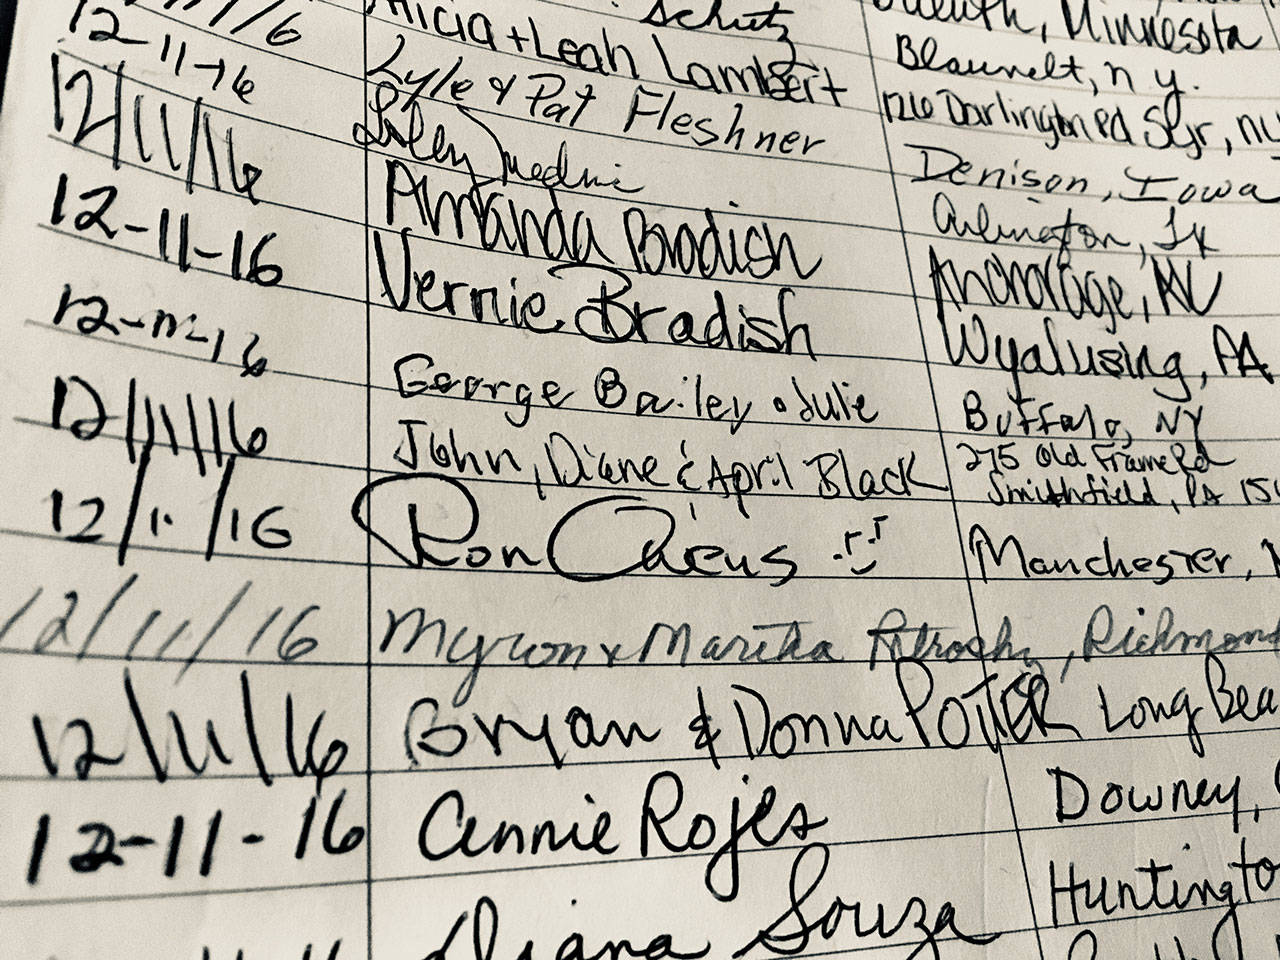 A visitor book at a church in Seneca Falls, New York. Photo courtesy of Greg Asimakoupoulos